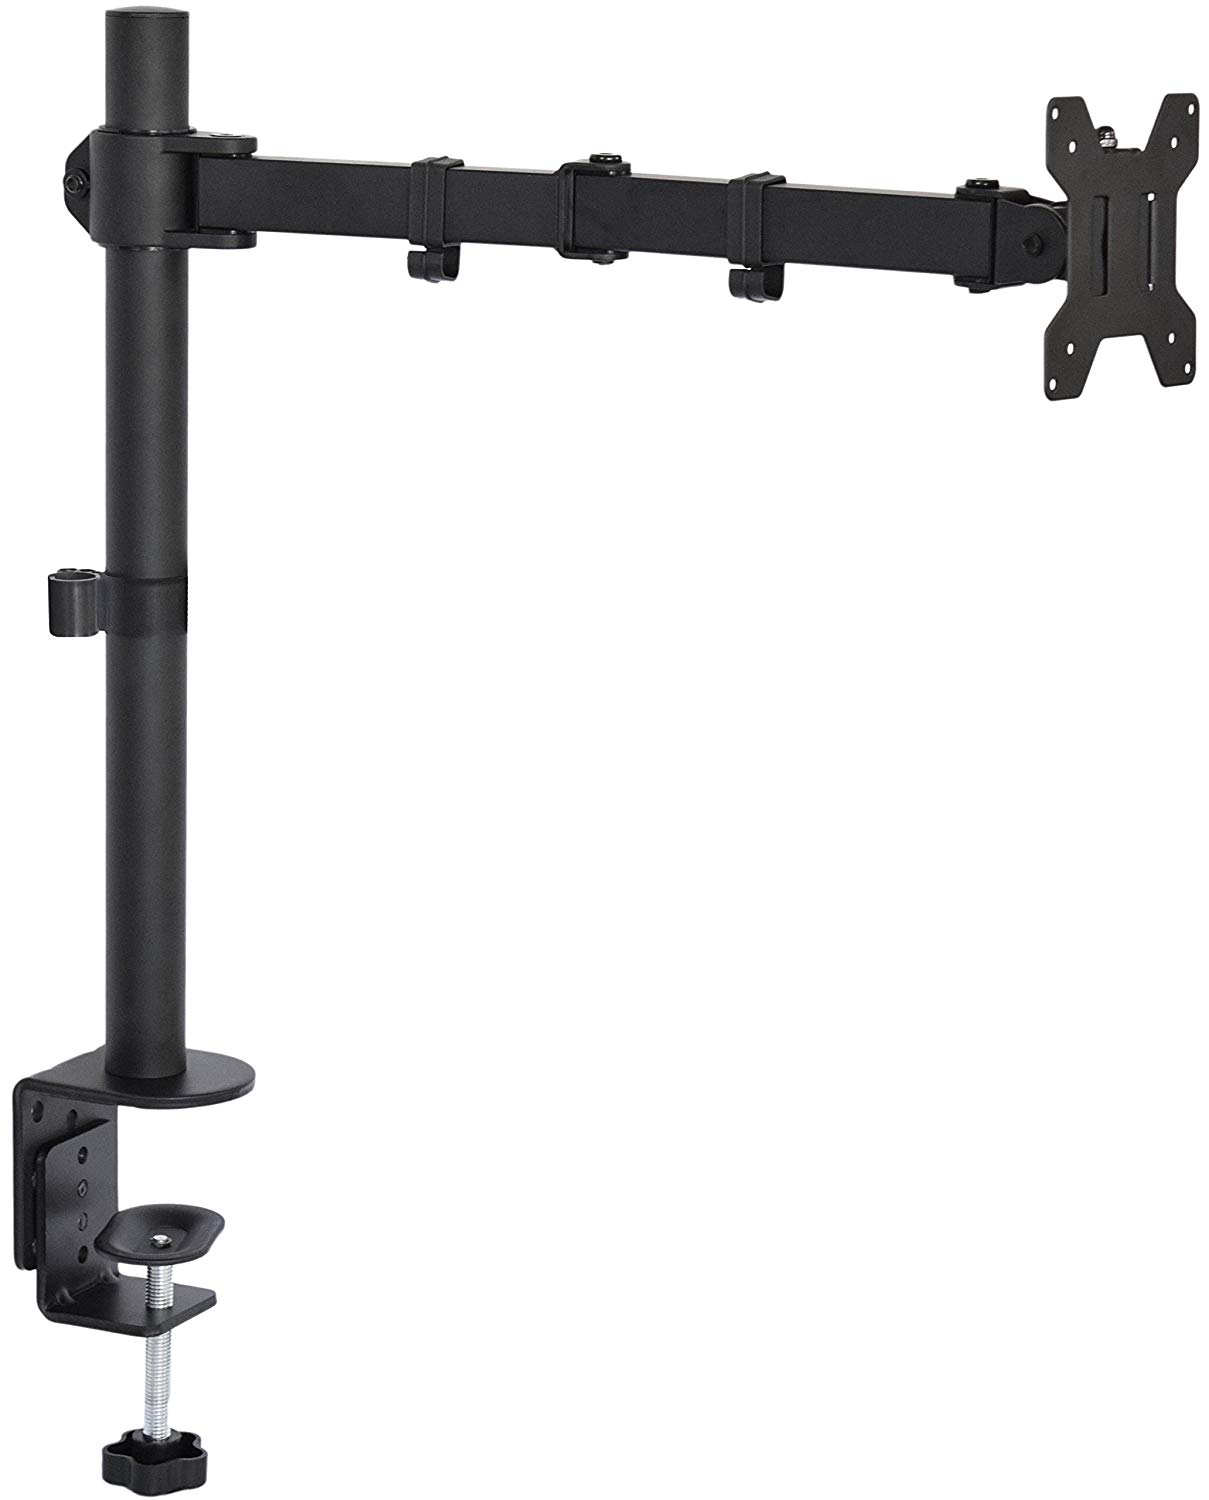 Rendering of the Vivo monitor arm